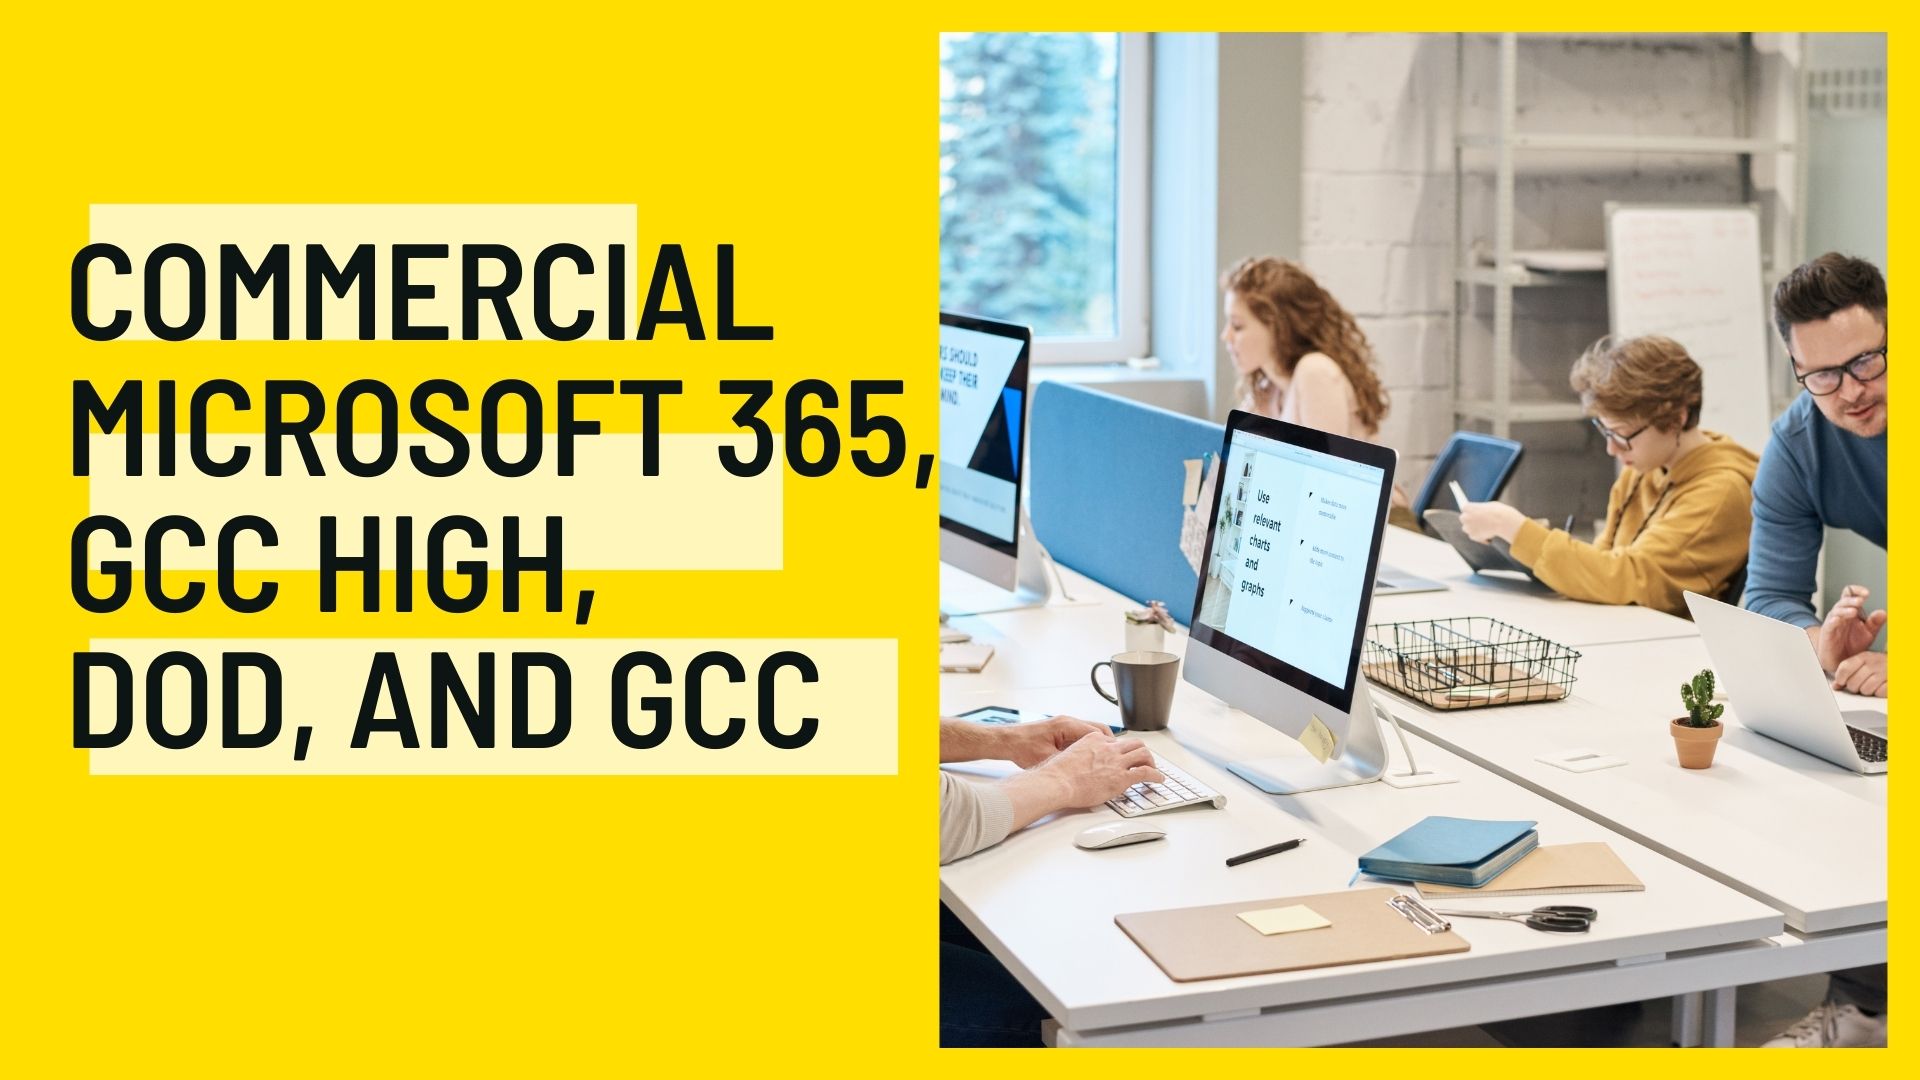 Understanding GCC High, GCC, DOD, and Commercial Microsoft 365 - thumb image